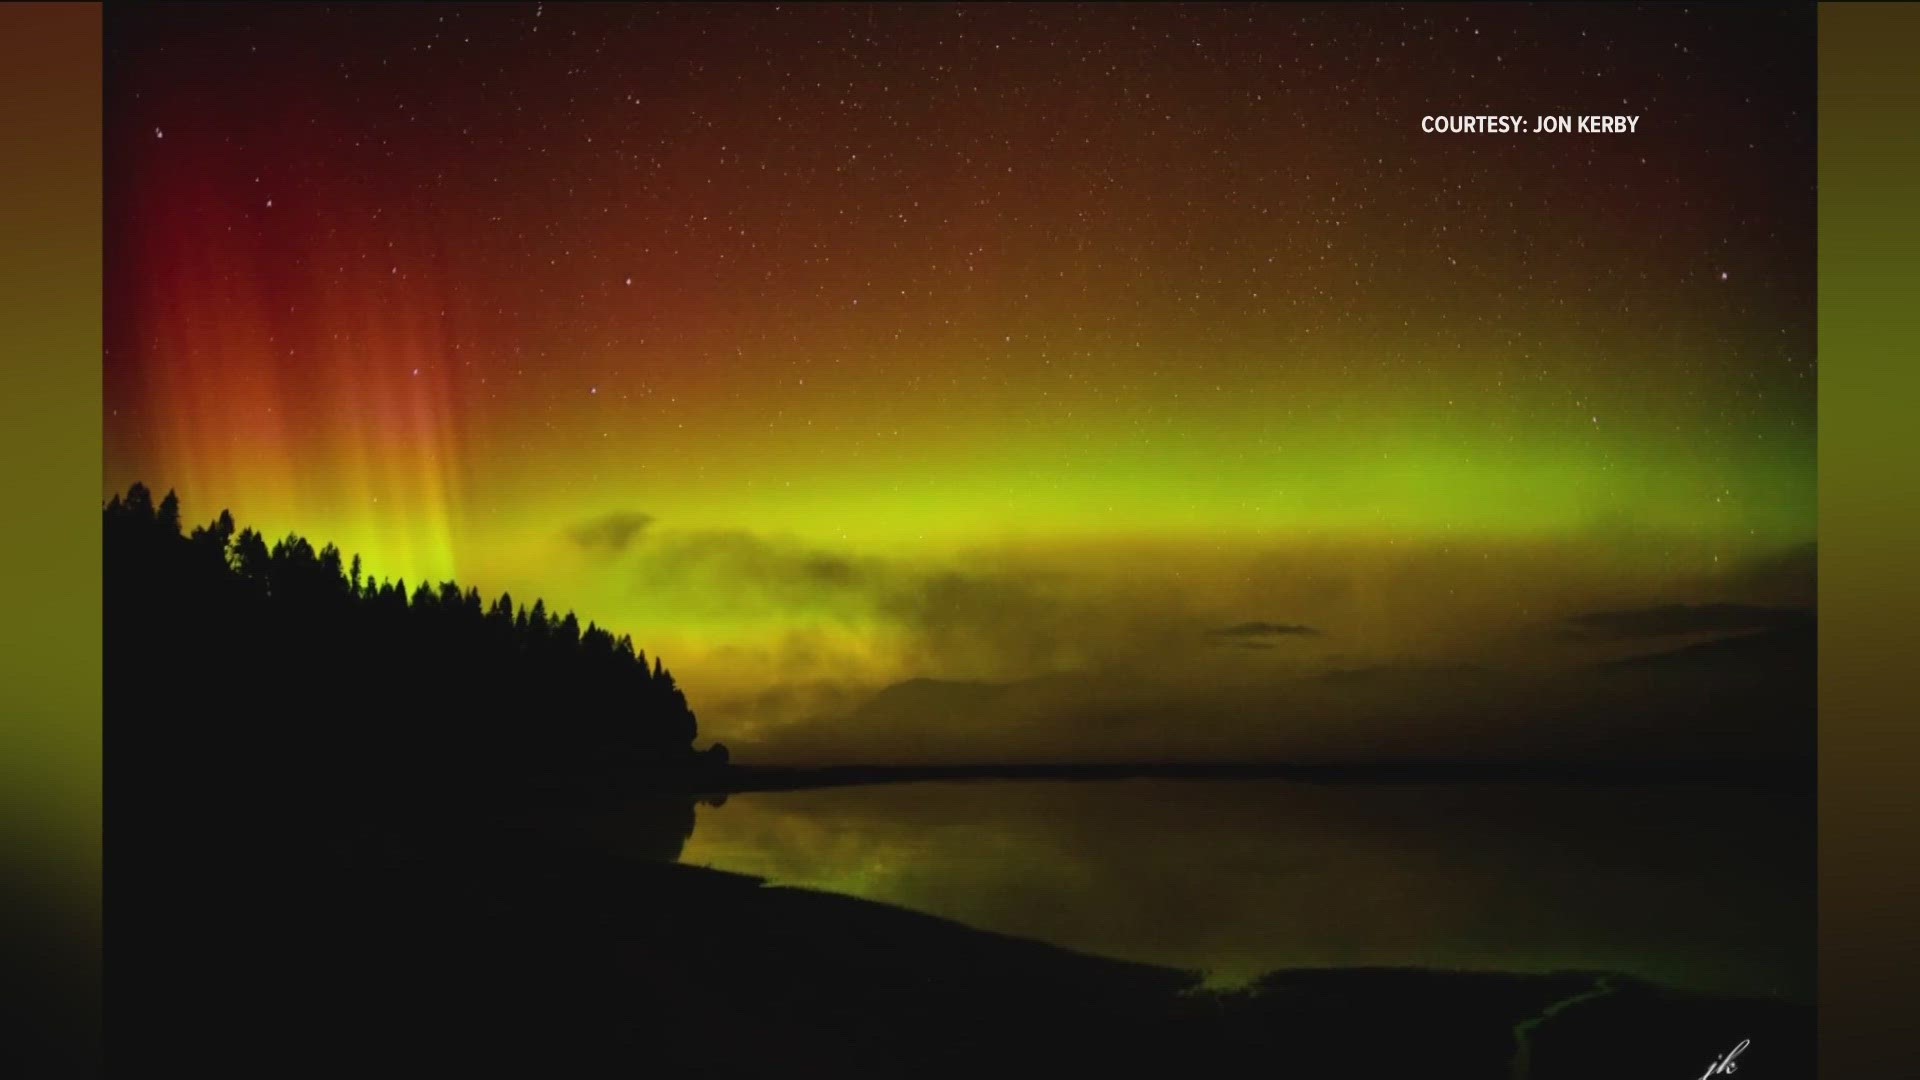 Photos of the Aurora Borealis last night were sent by viewers of the Idaho Weather Watchers page.